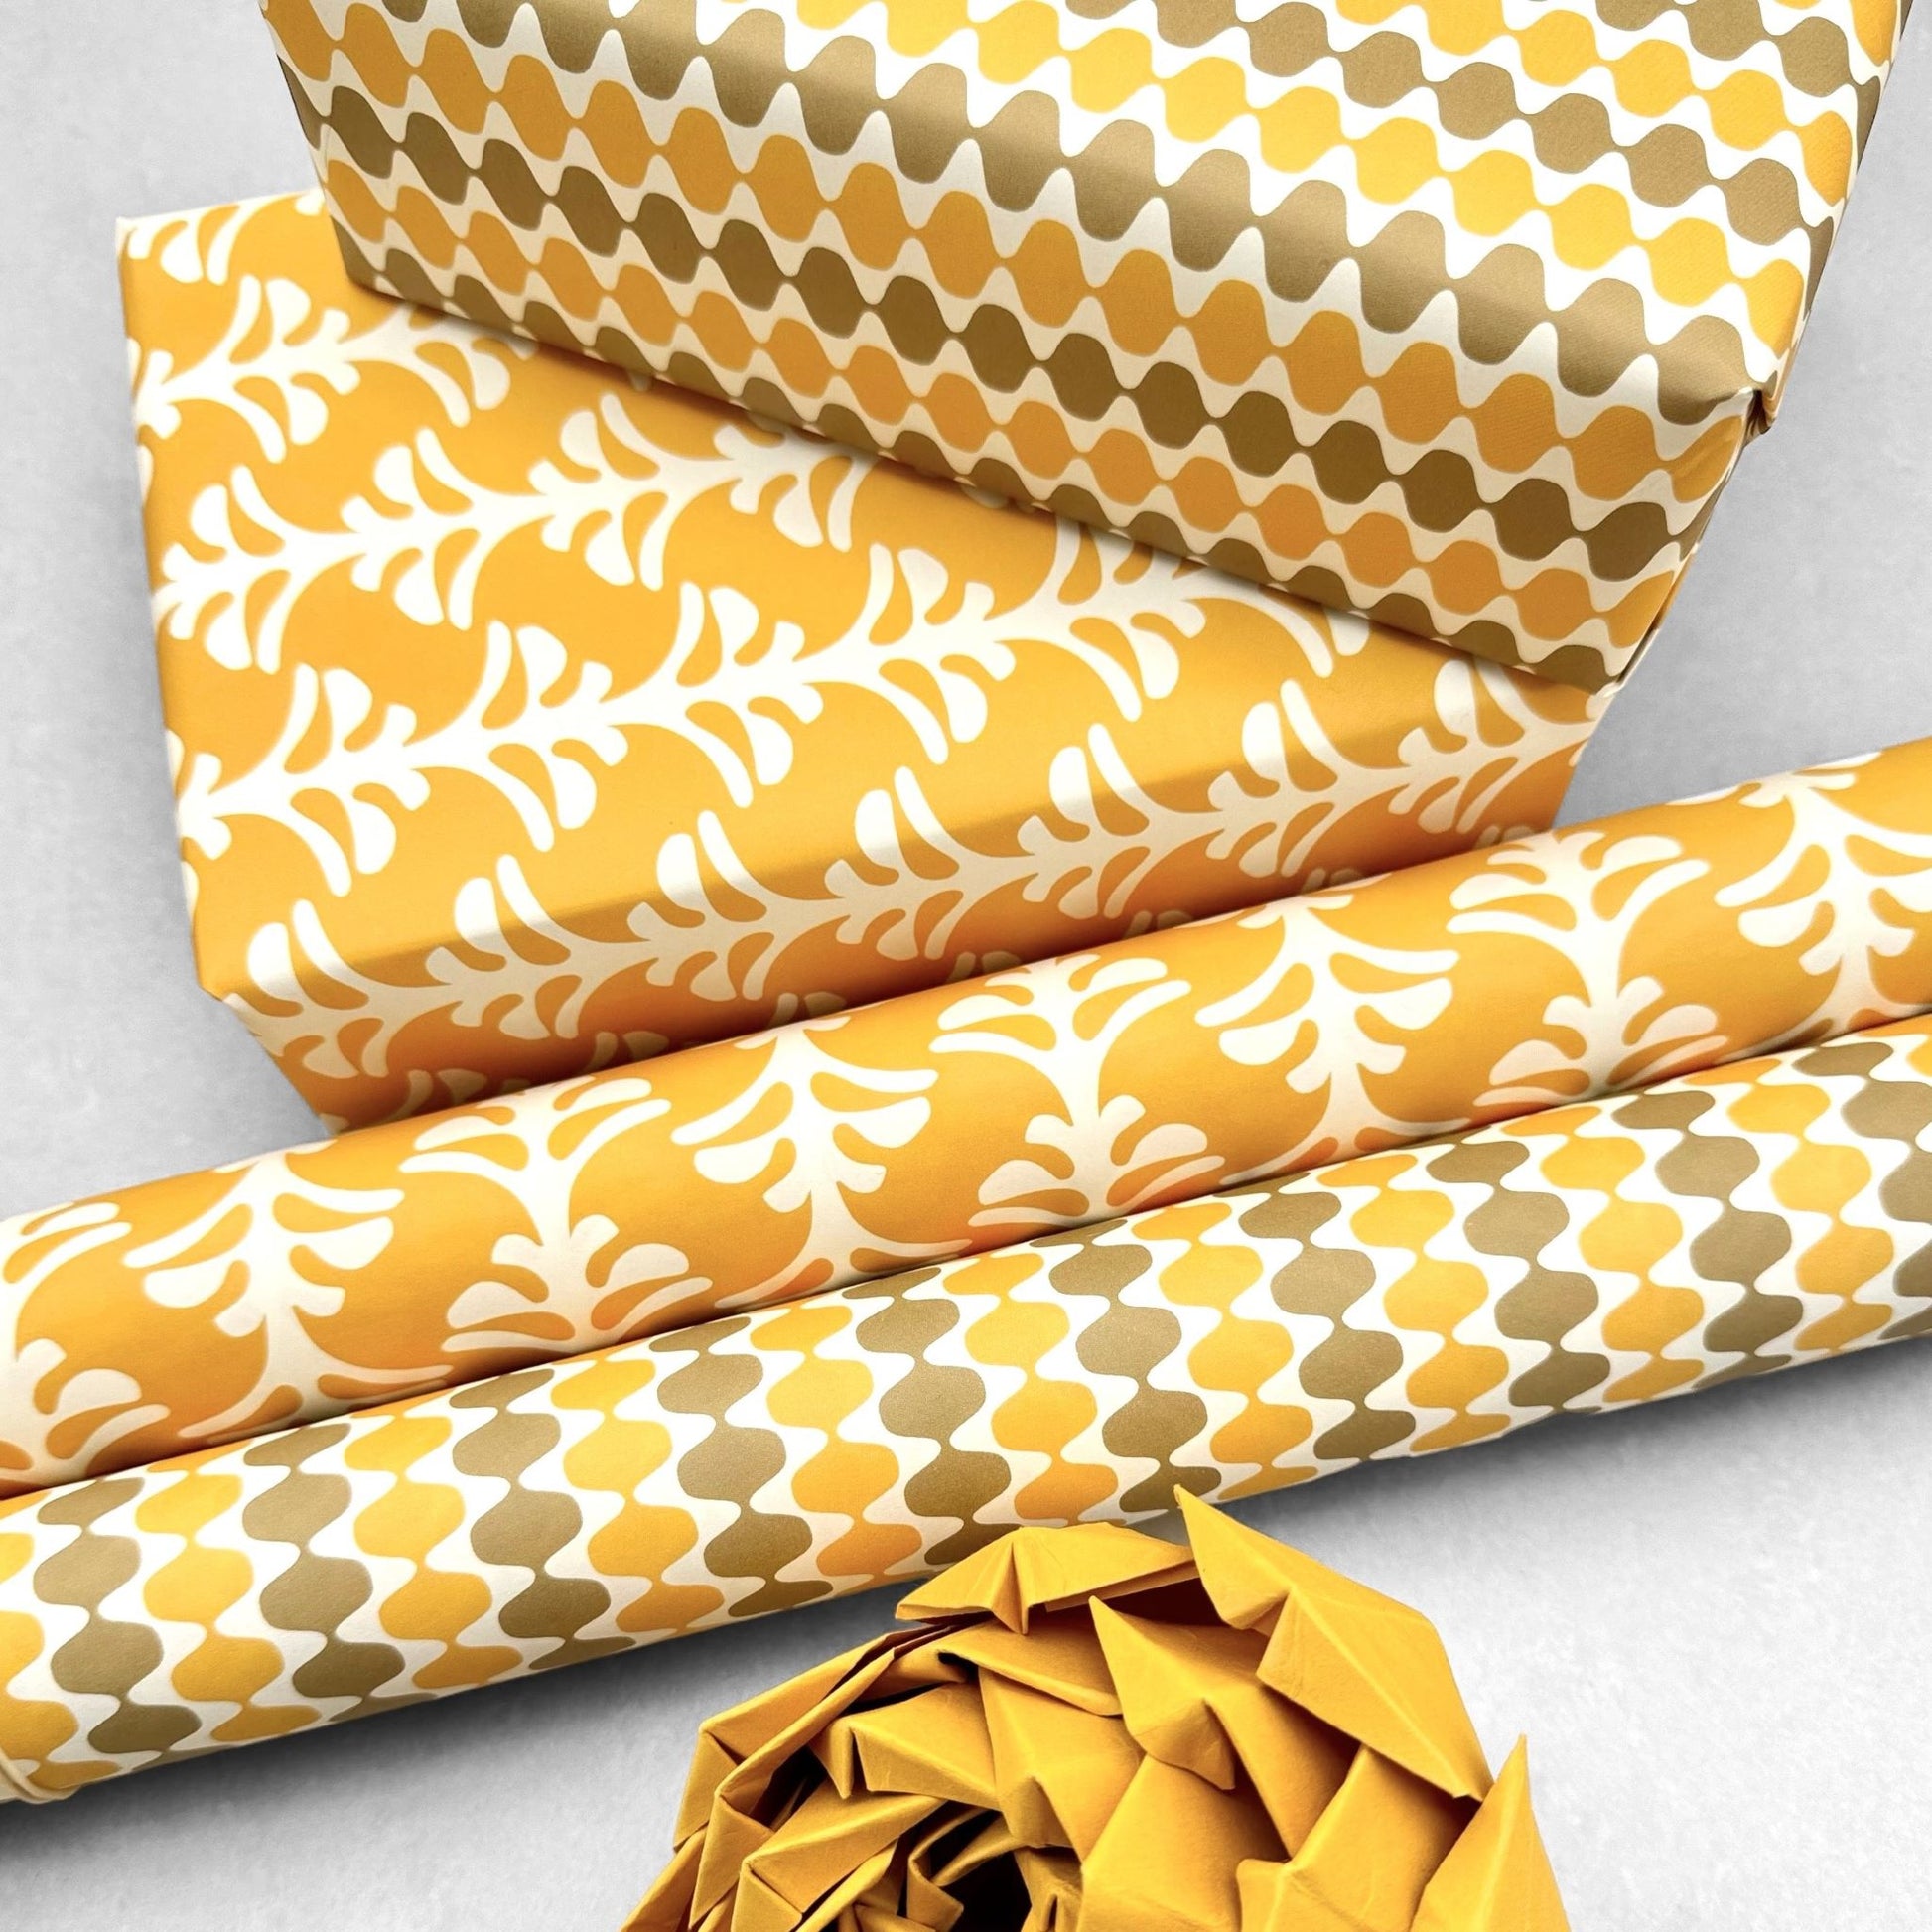 wrapping paper by Otto Editions with a cut-out palm design in white on a saffron yellow background. Pictured wrapped as a present with other designs